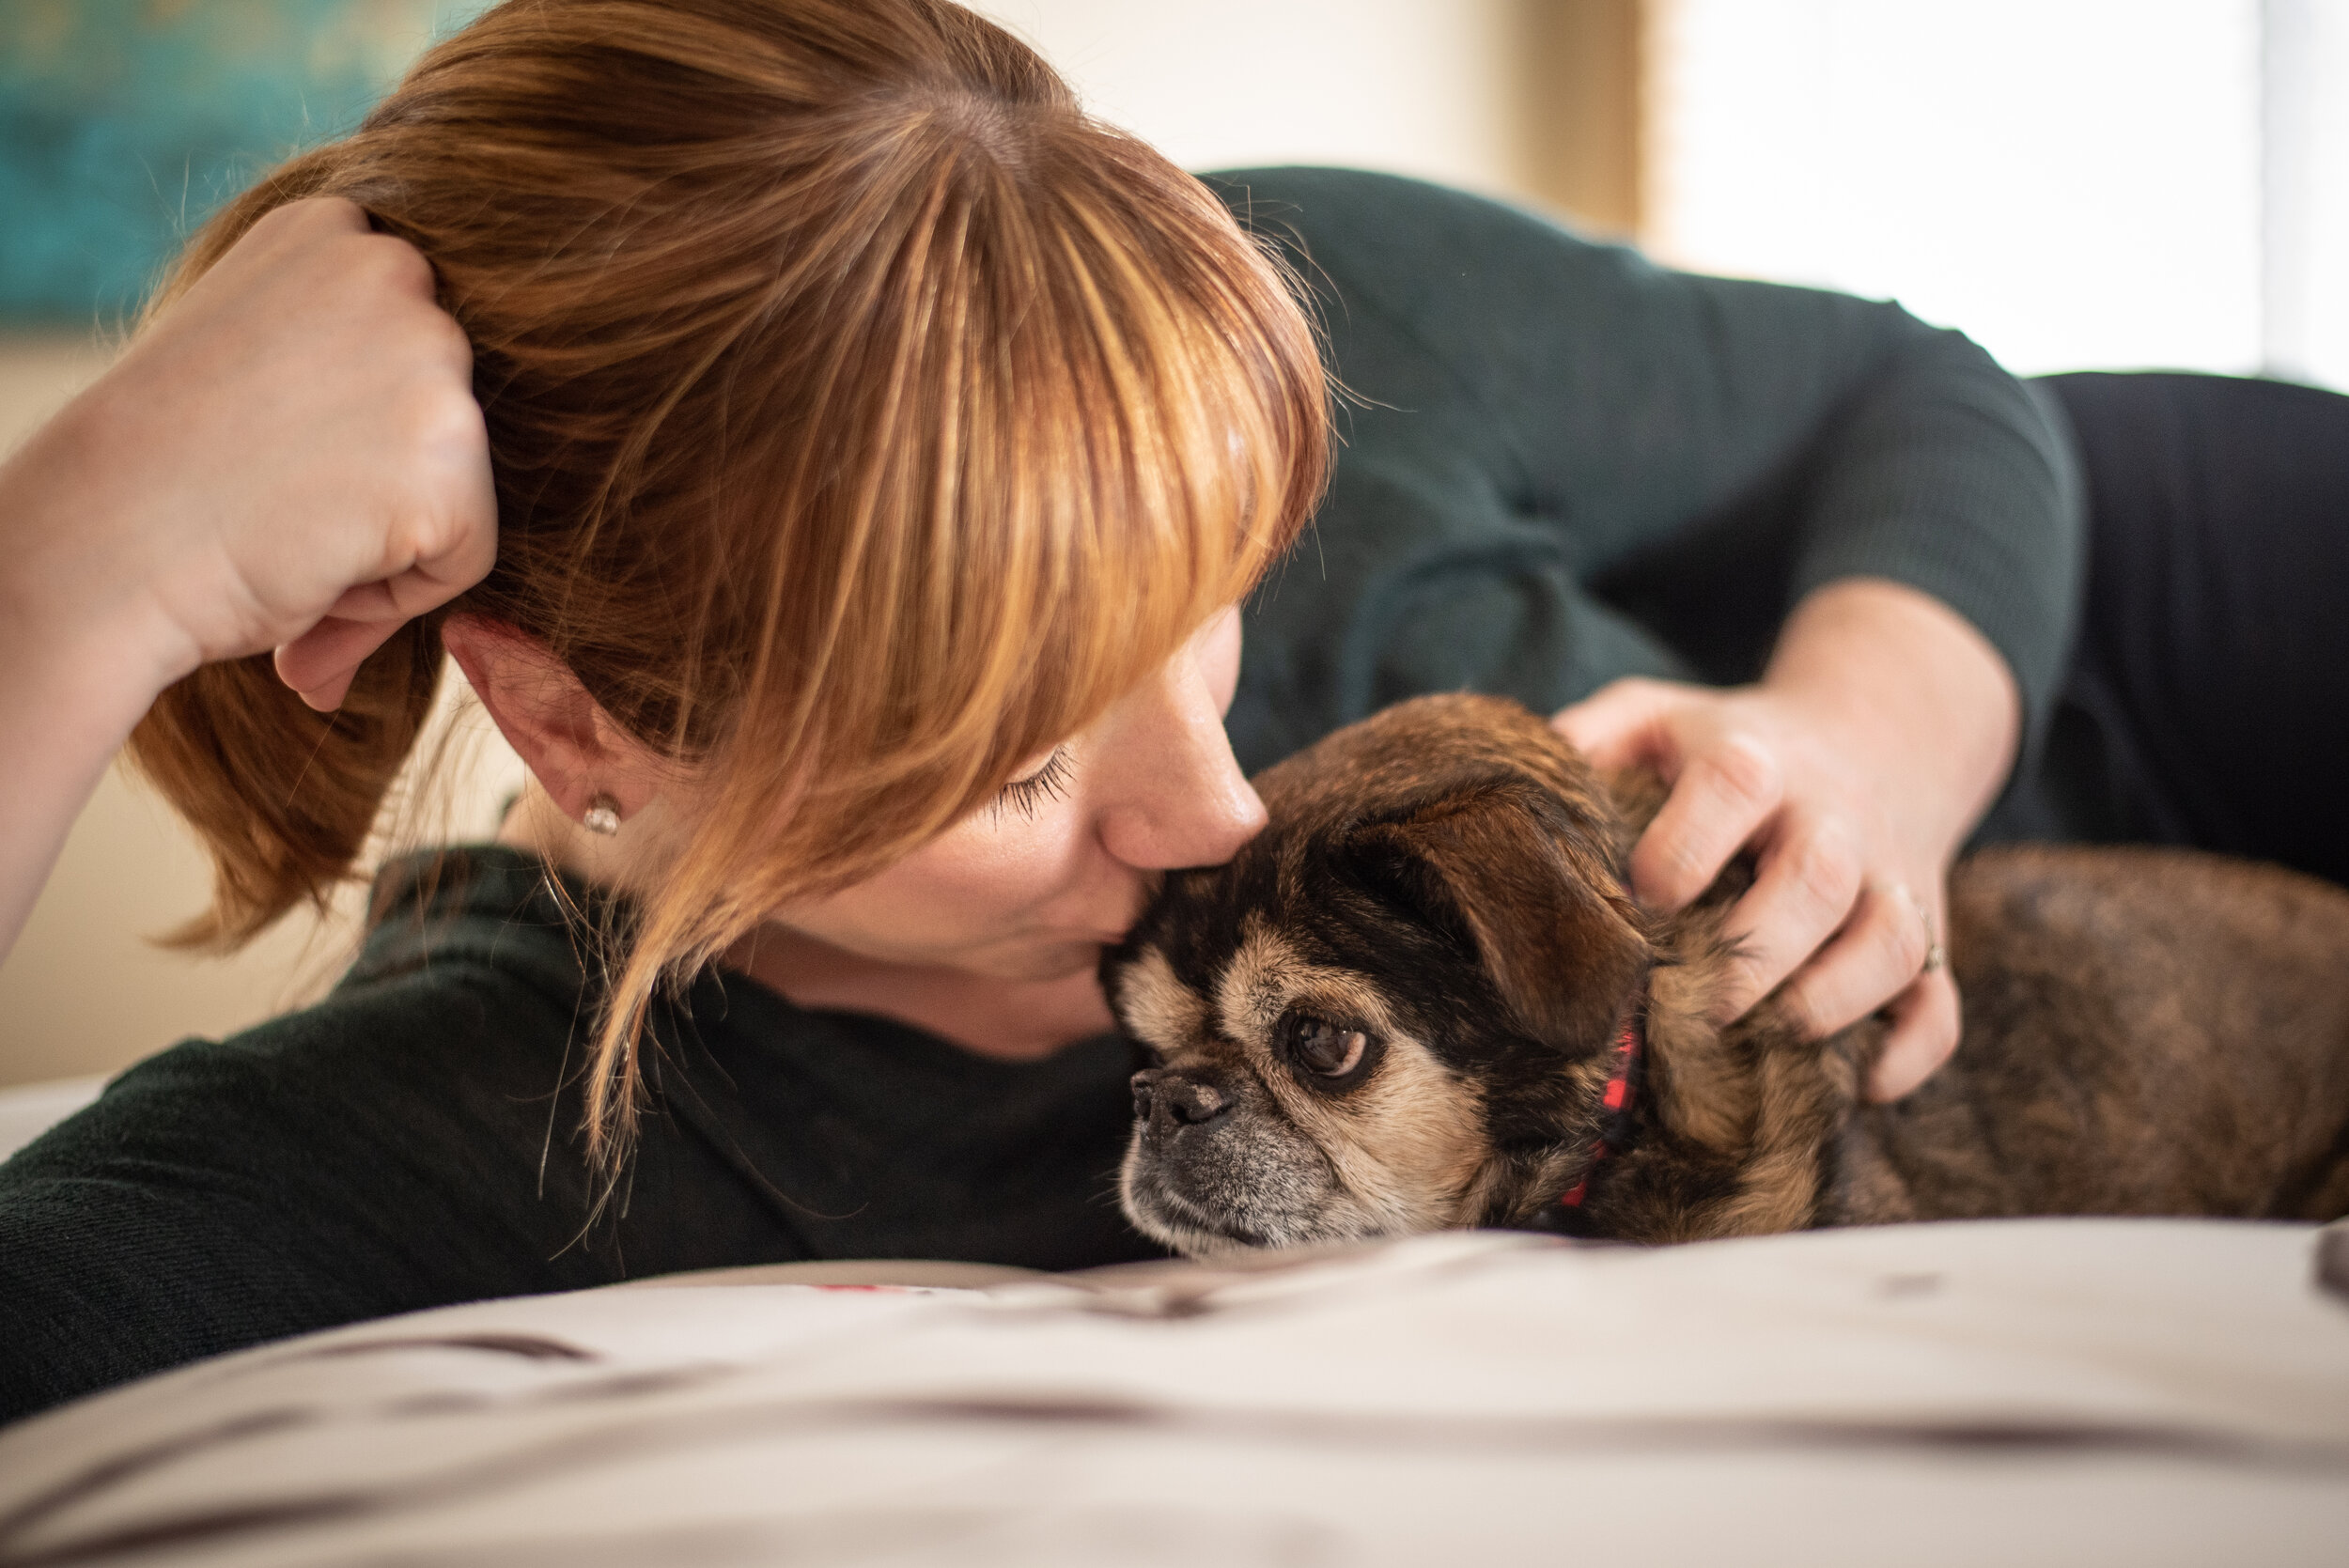 A small dog on the bed getting a kiss from a women with a ponytail